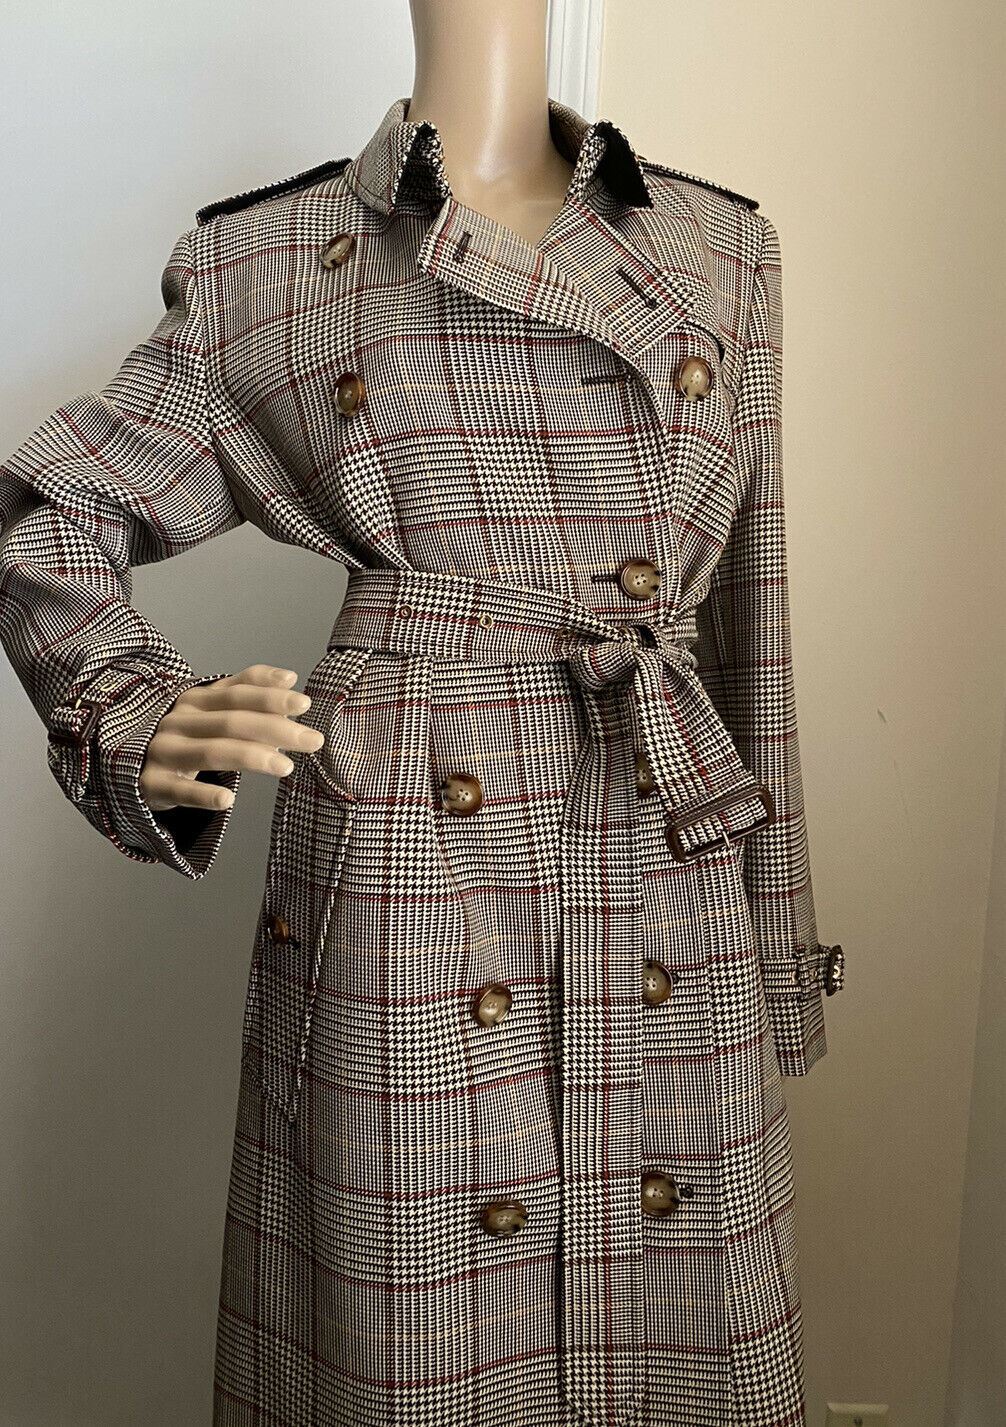 New $2750 Burberry Women Kensington Prince Of Wales Check Wool Trench Coat 10 US